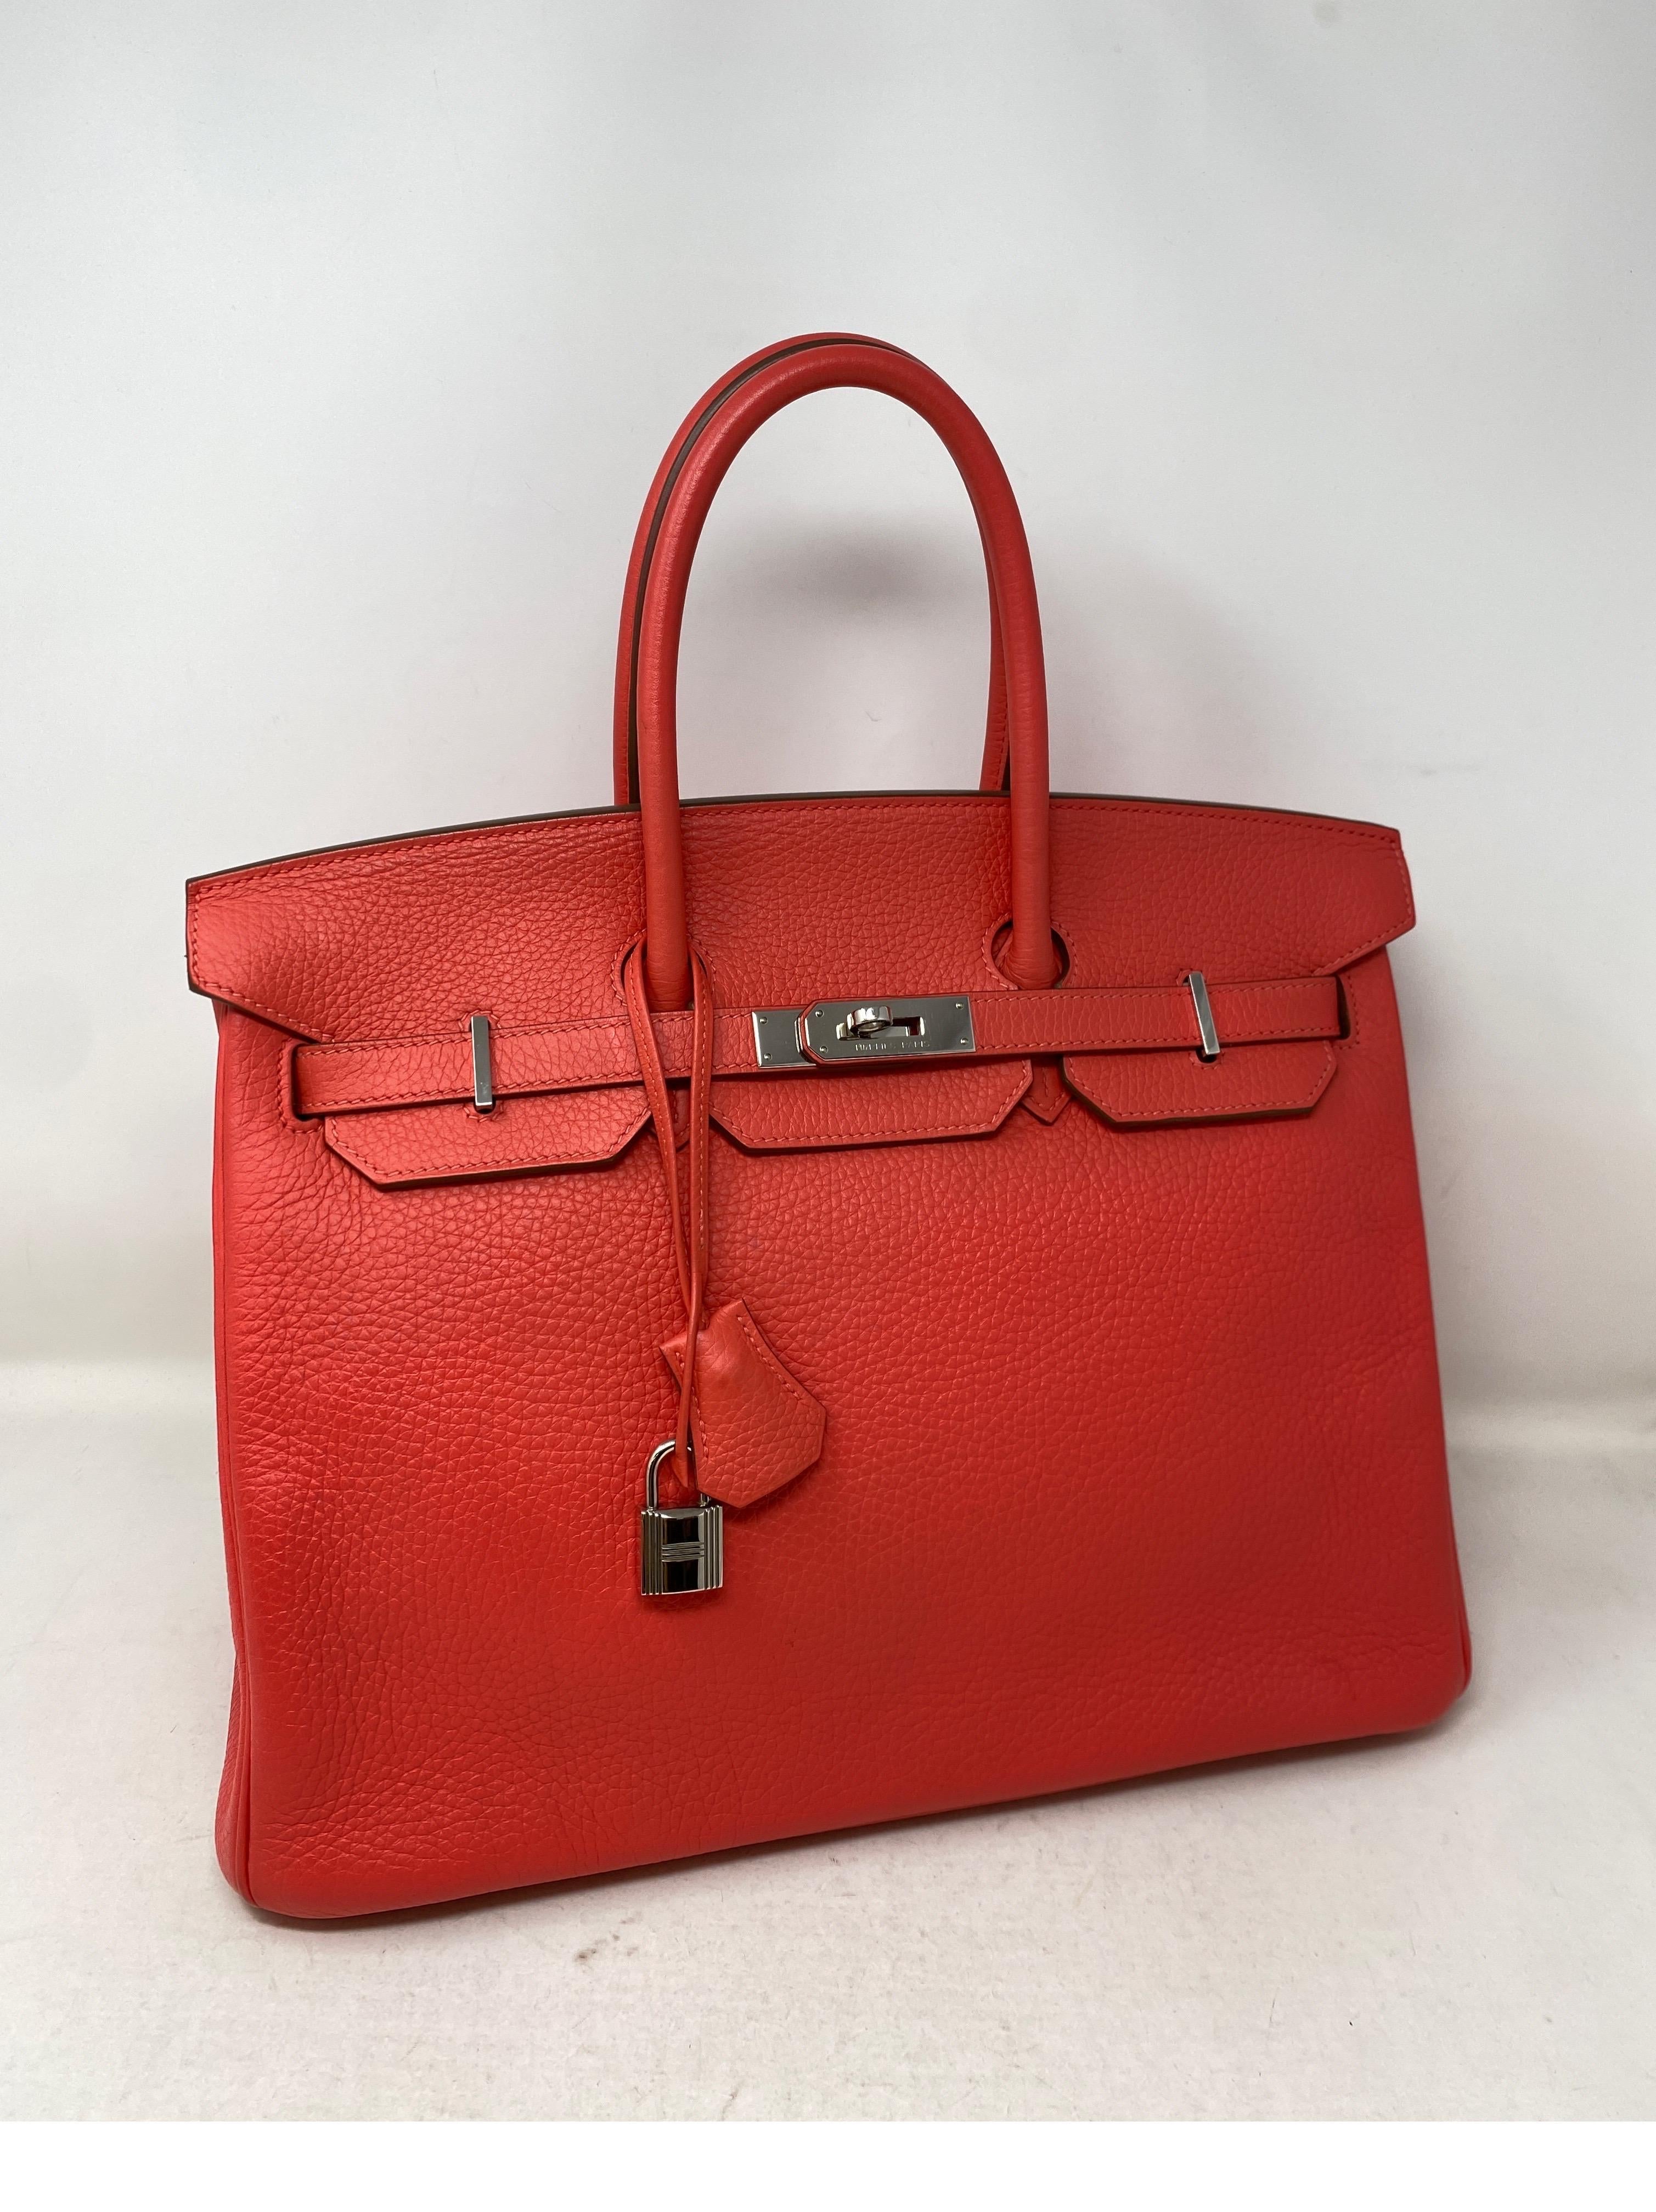 Hermes Rose Jaipur Birkin 35 Bag. Excellent condition like new. Palladium hardware. Beautiful rosy pink orange color bag. Clemence leather. Includes clochette, lock, keys, and dust cover. Guaranteed authentic. 